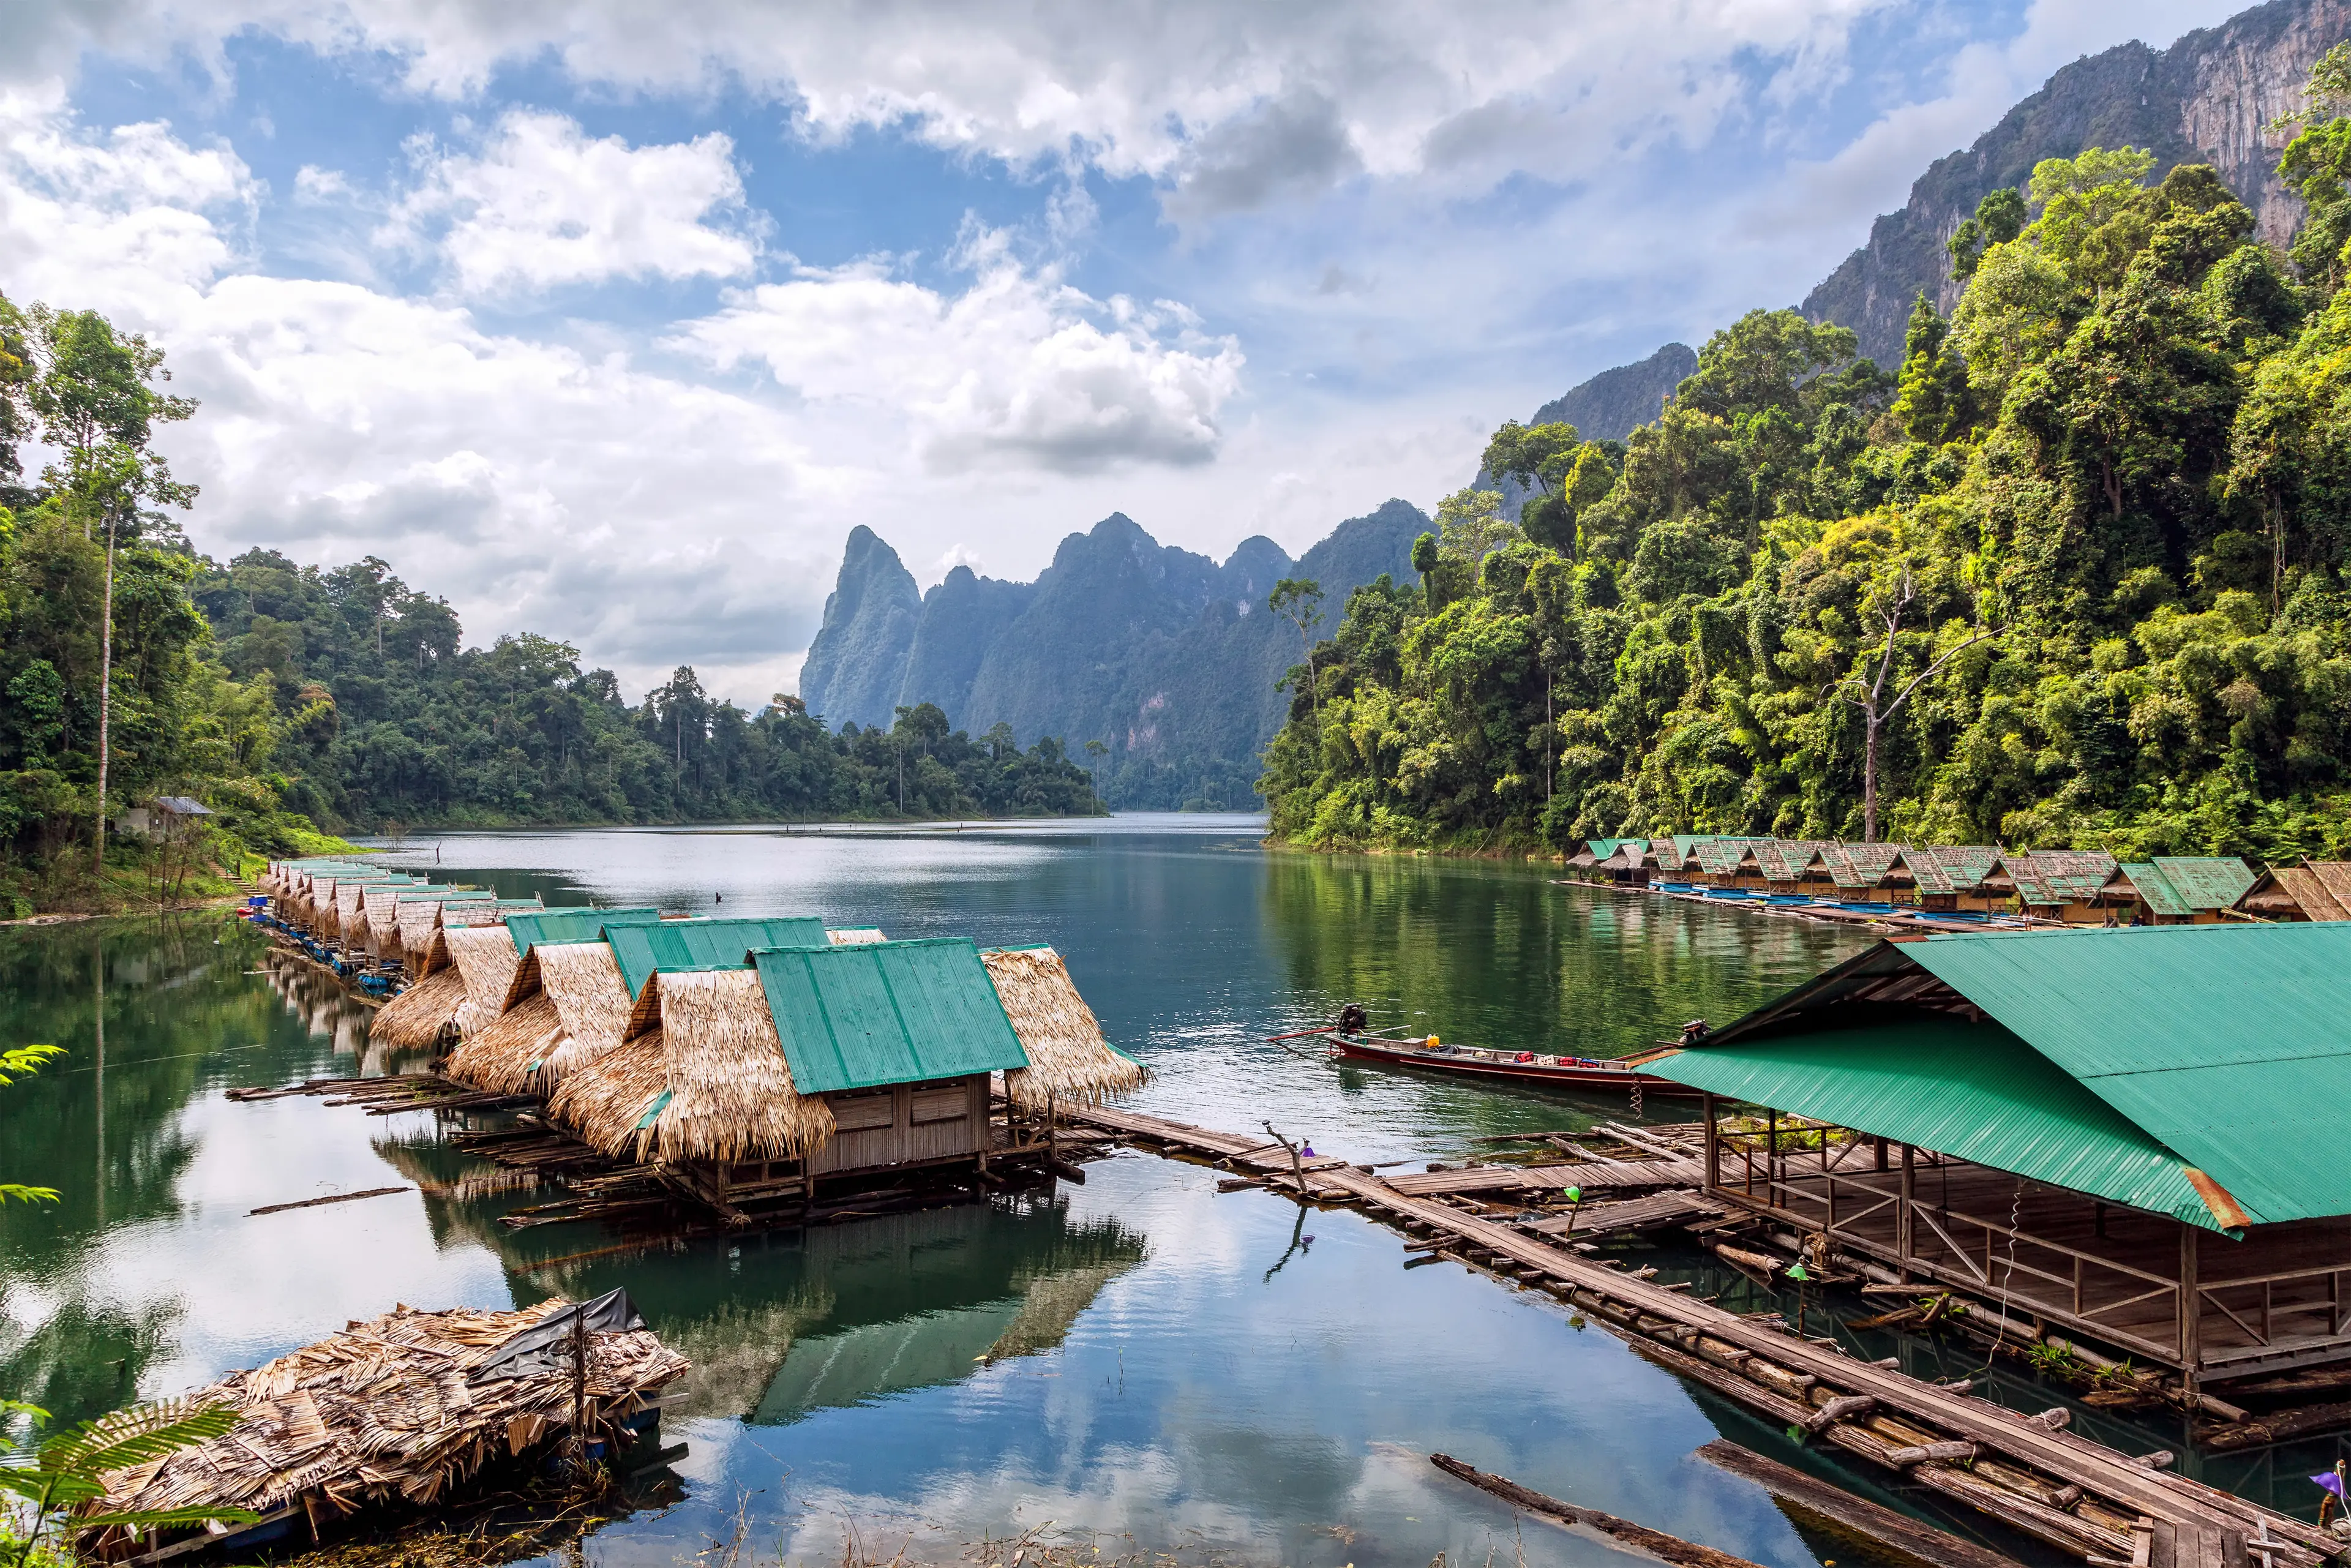 Explore Khao Sok National Park, Thailand in 1 Day